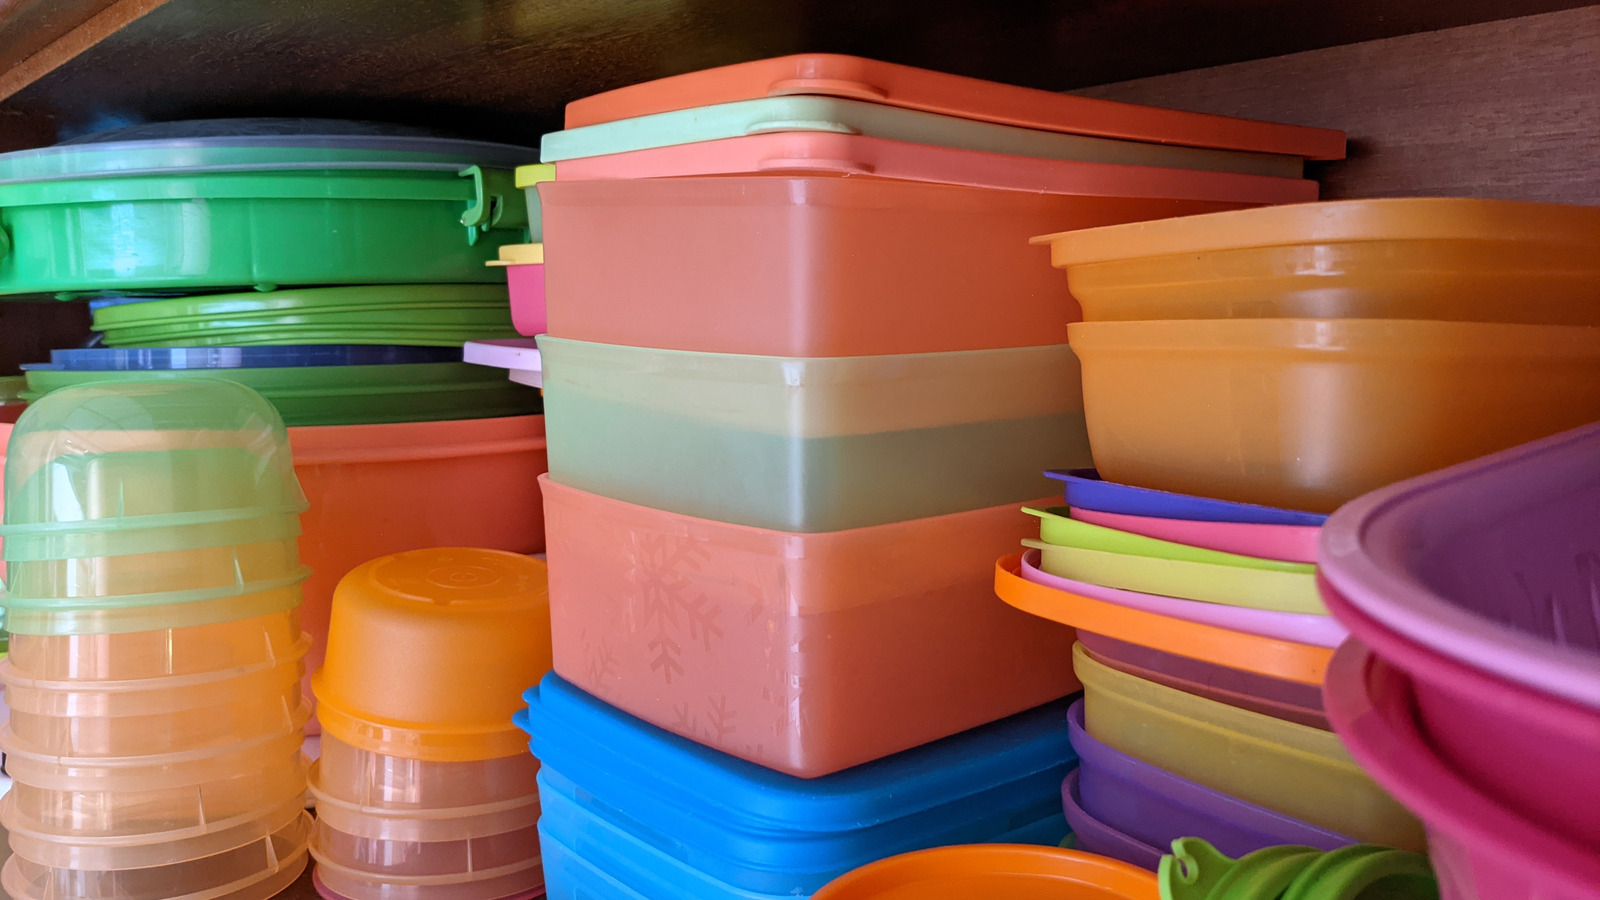 Can You Microwave Tupperware? safe or dangerous?